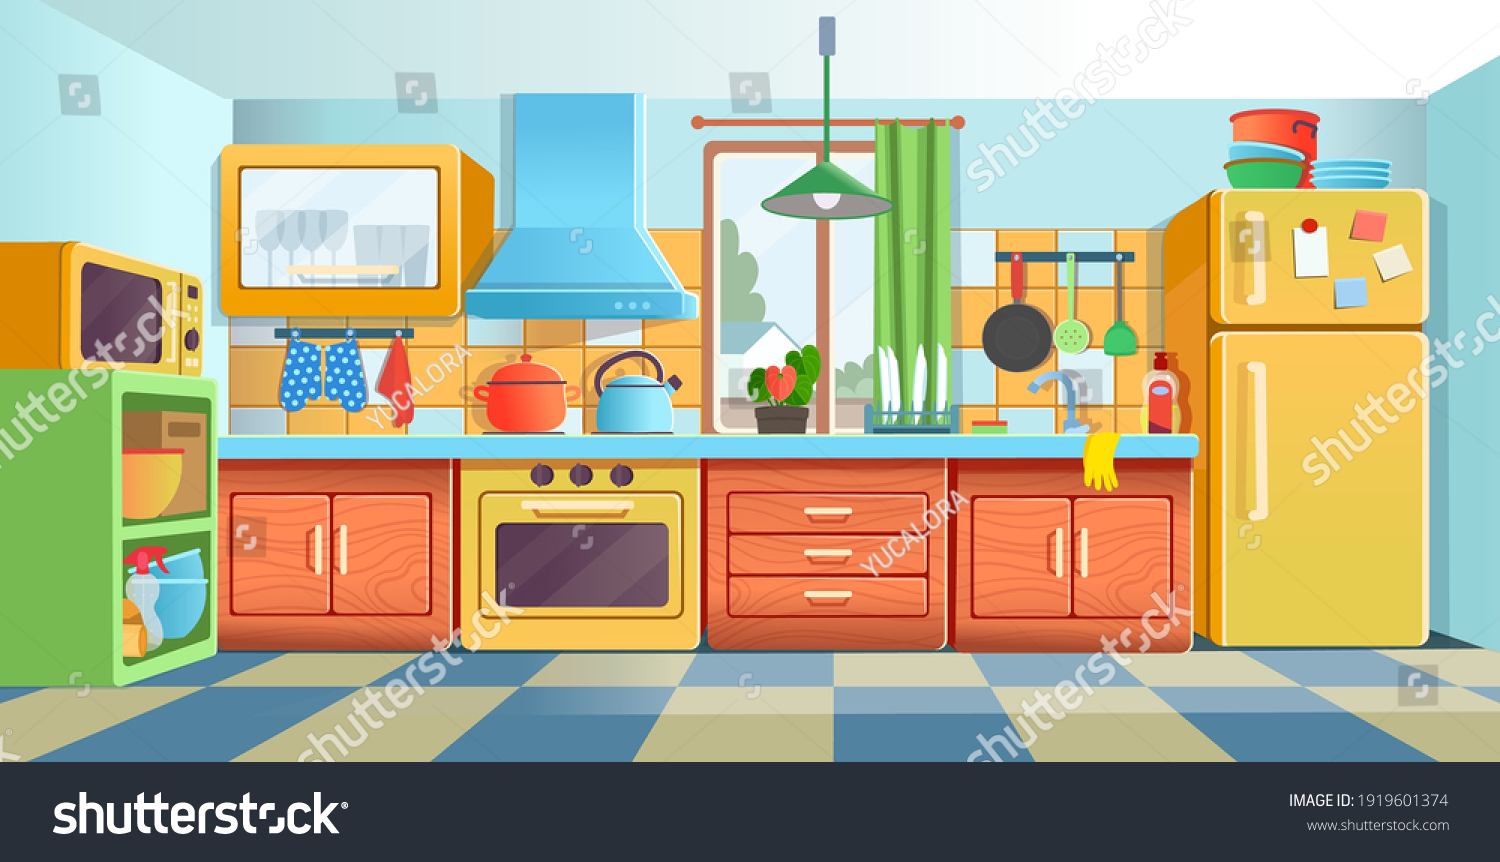 Stock Vector Cozy Colored Kitchen Interior With Fridge Kitchen Stove Cupboard Dishes Vector Illustration Flat 1919601374 